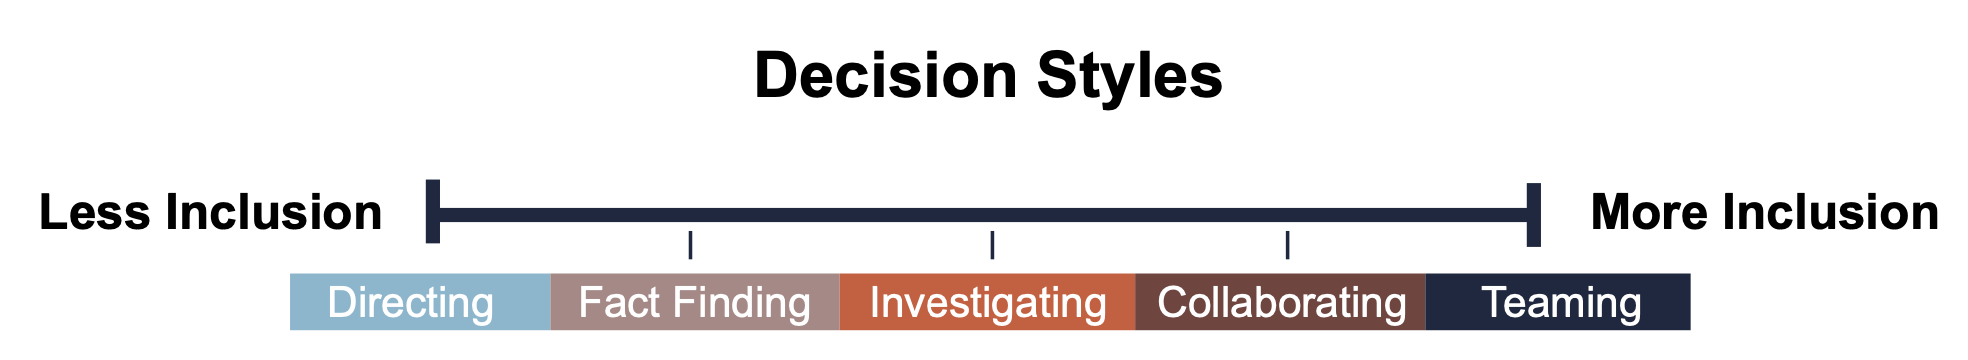 decision-making-styles.png